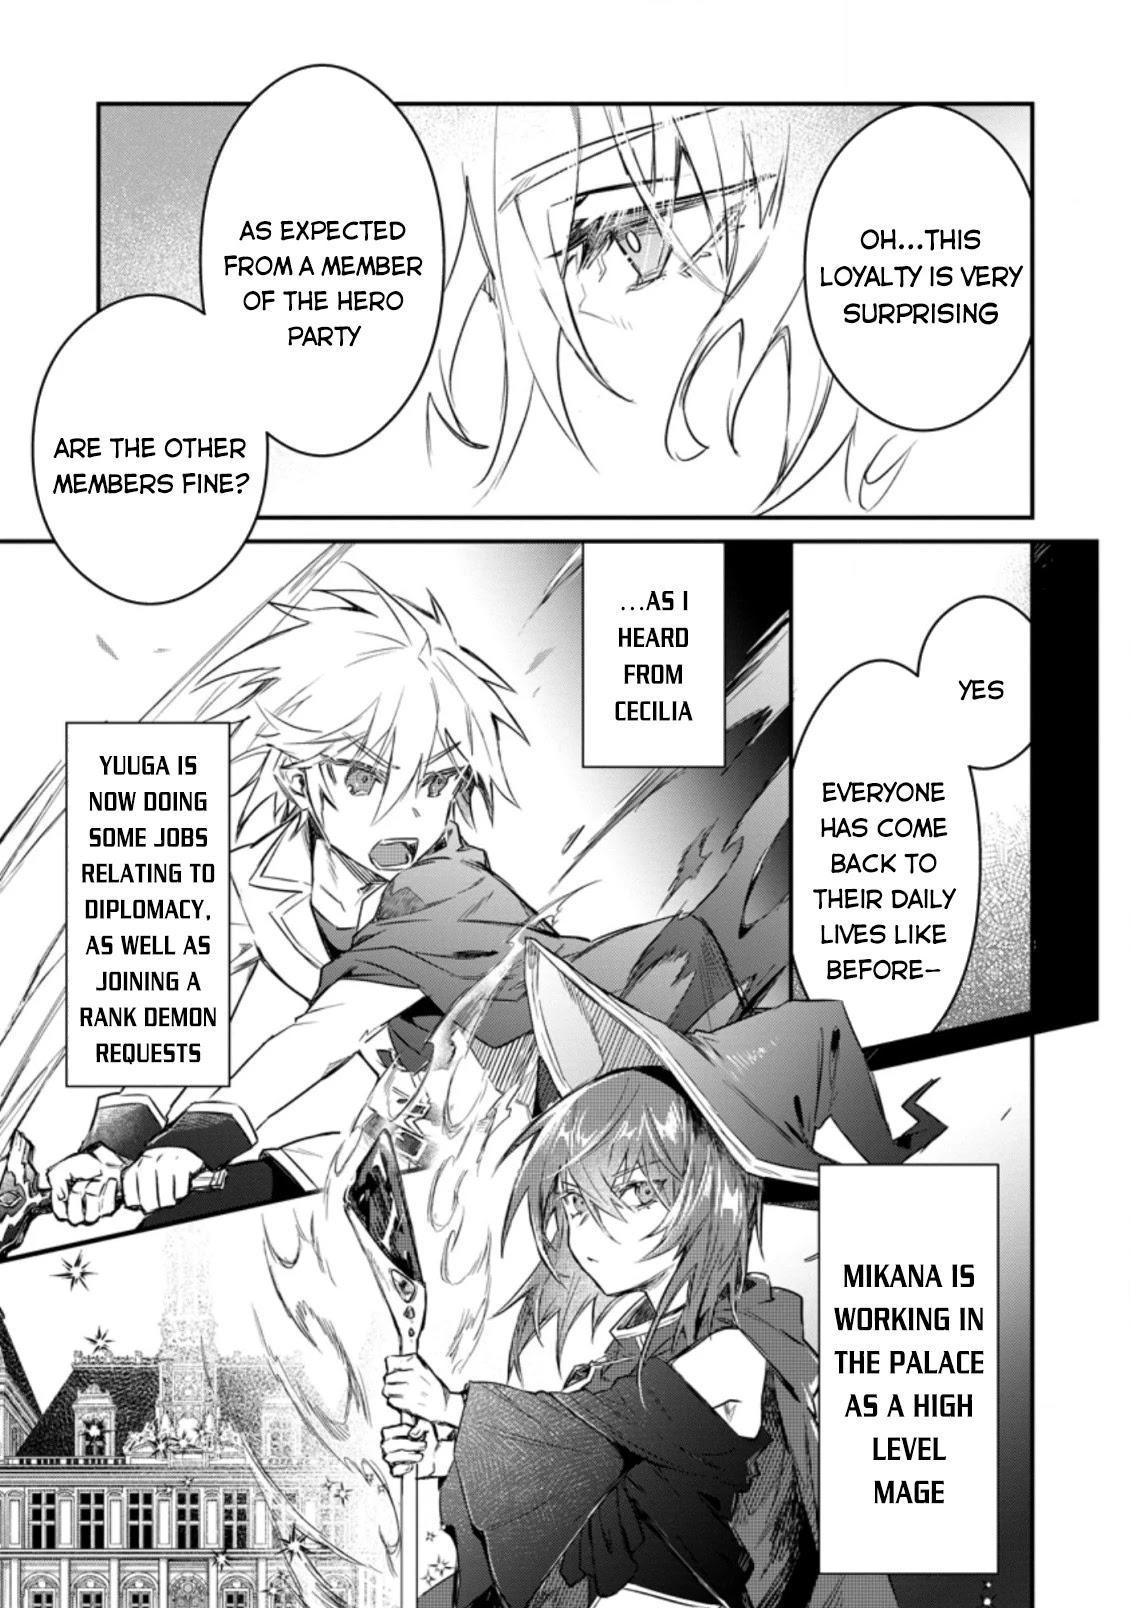 Read There Was A Cute Girl In The Hero'S Party, So I Tried Confessing To  Her Chapter 14 - Manganelo